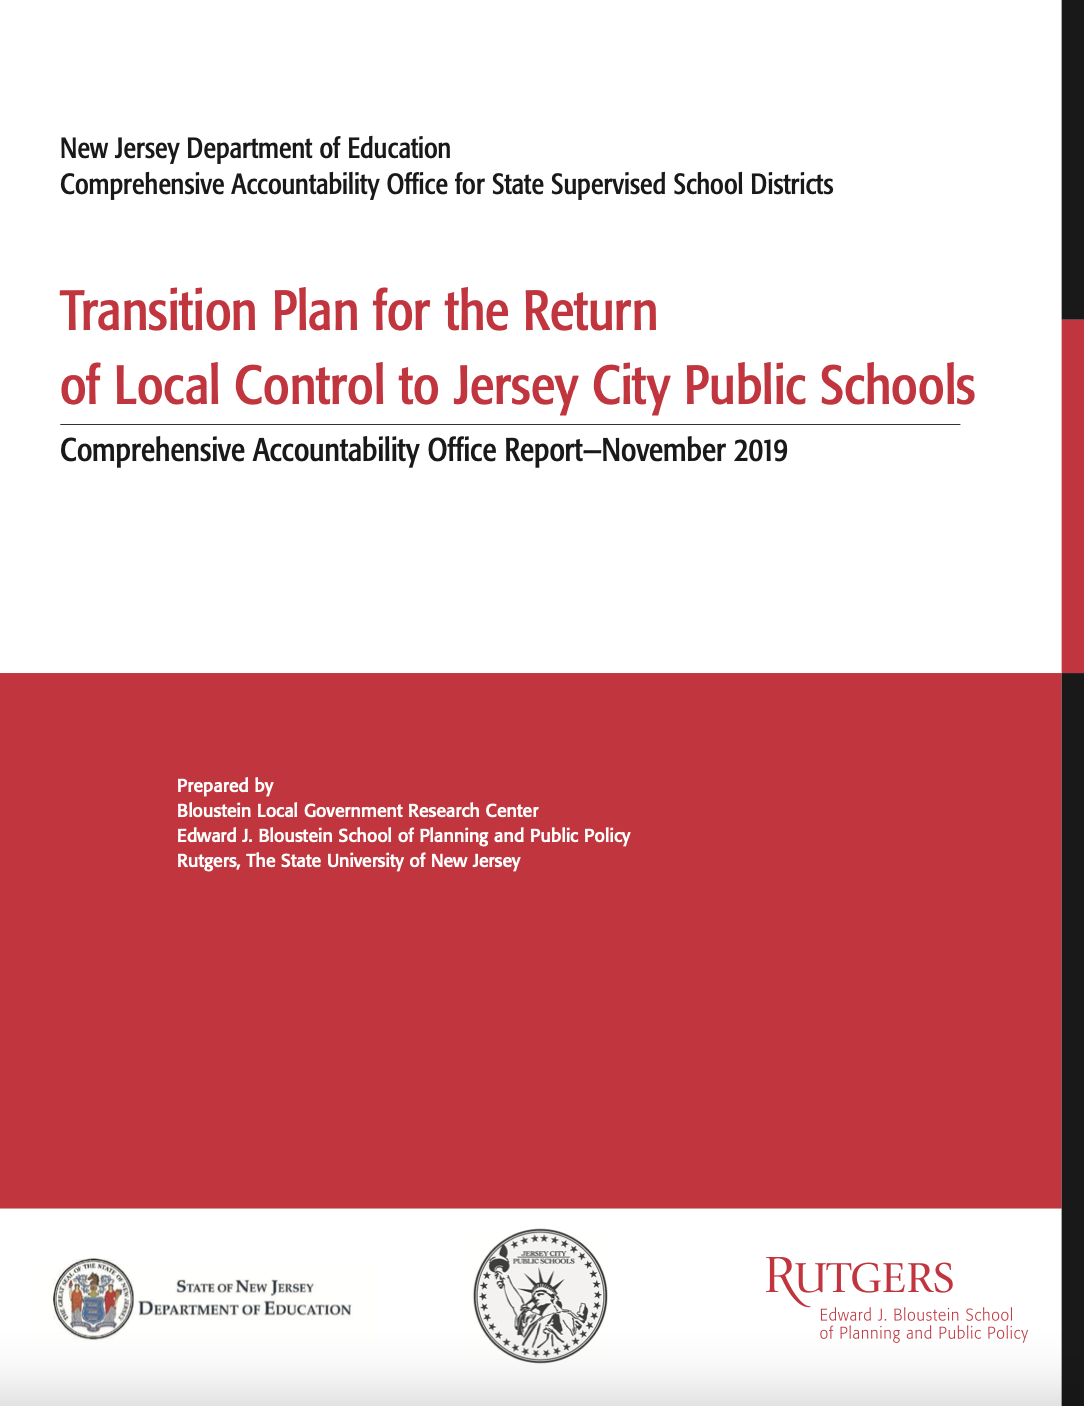 Transition Plan for the Return of Local Control to Jersey City Public Schools